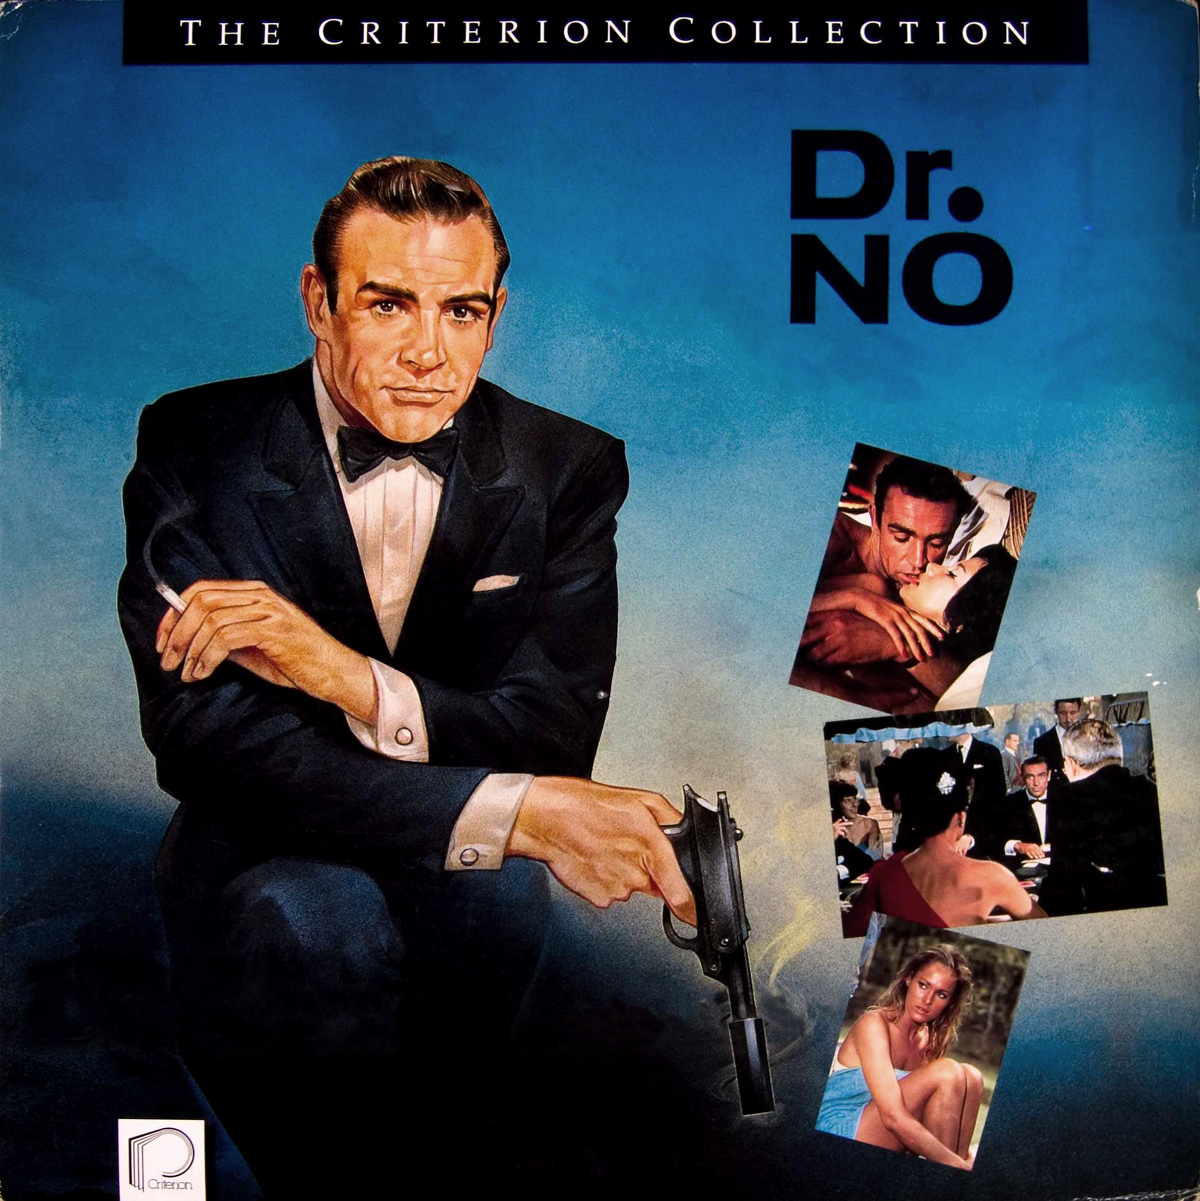 Illustrated 007 - The Art of James Bond: Criterion Cover Art Dr No